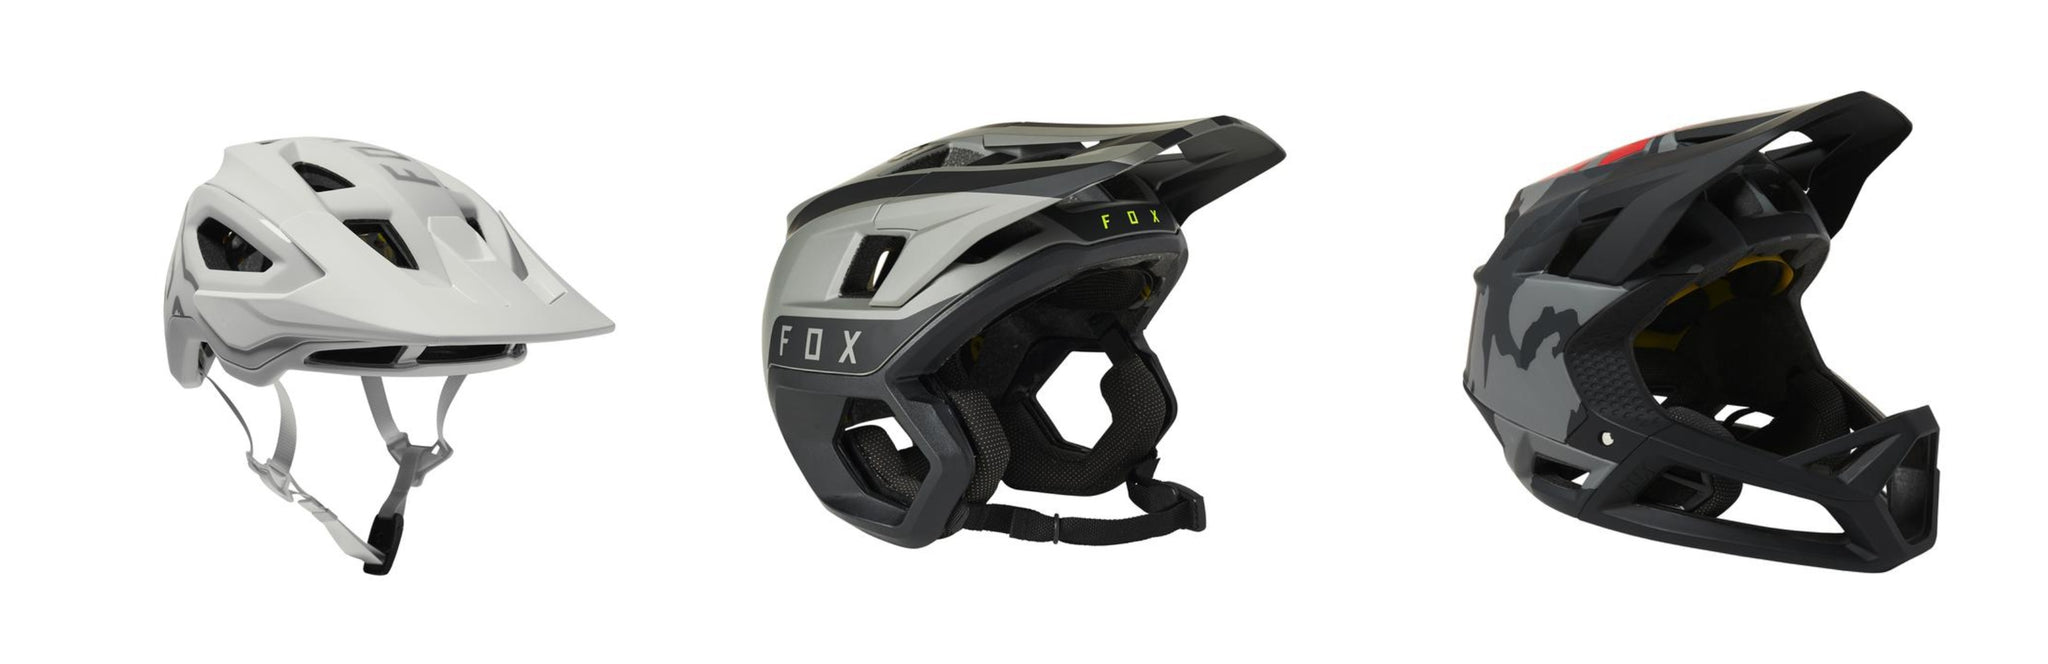 MTB holiday gift guide helmets